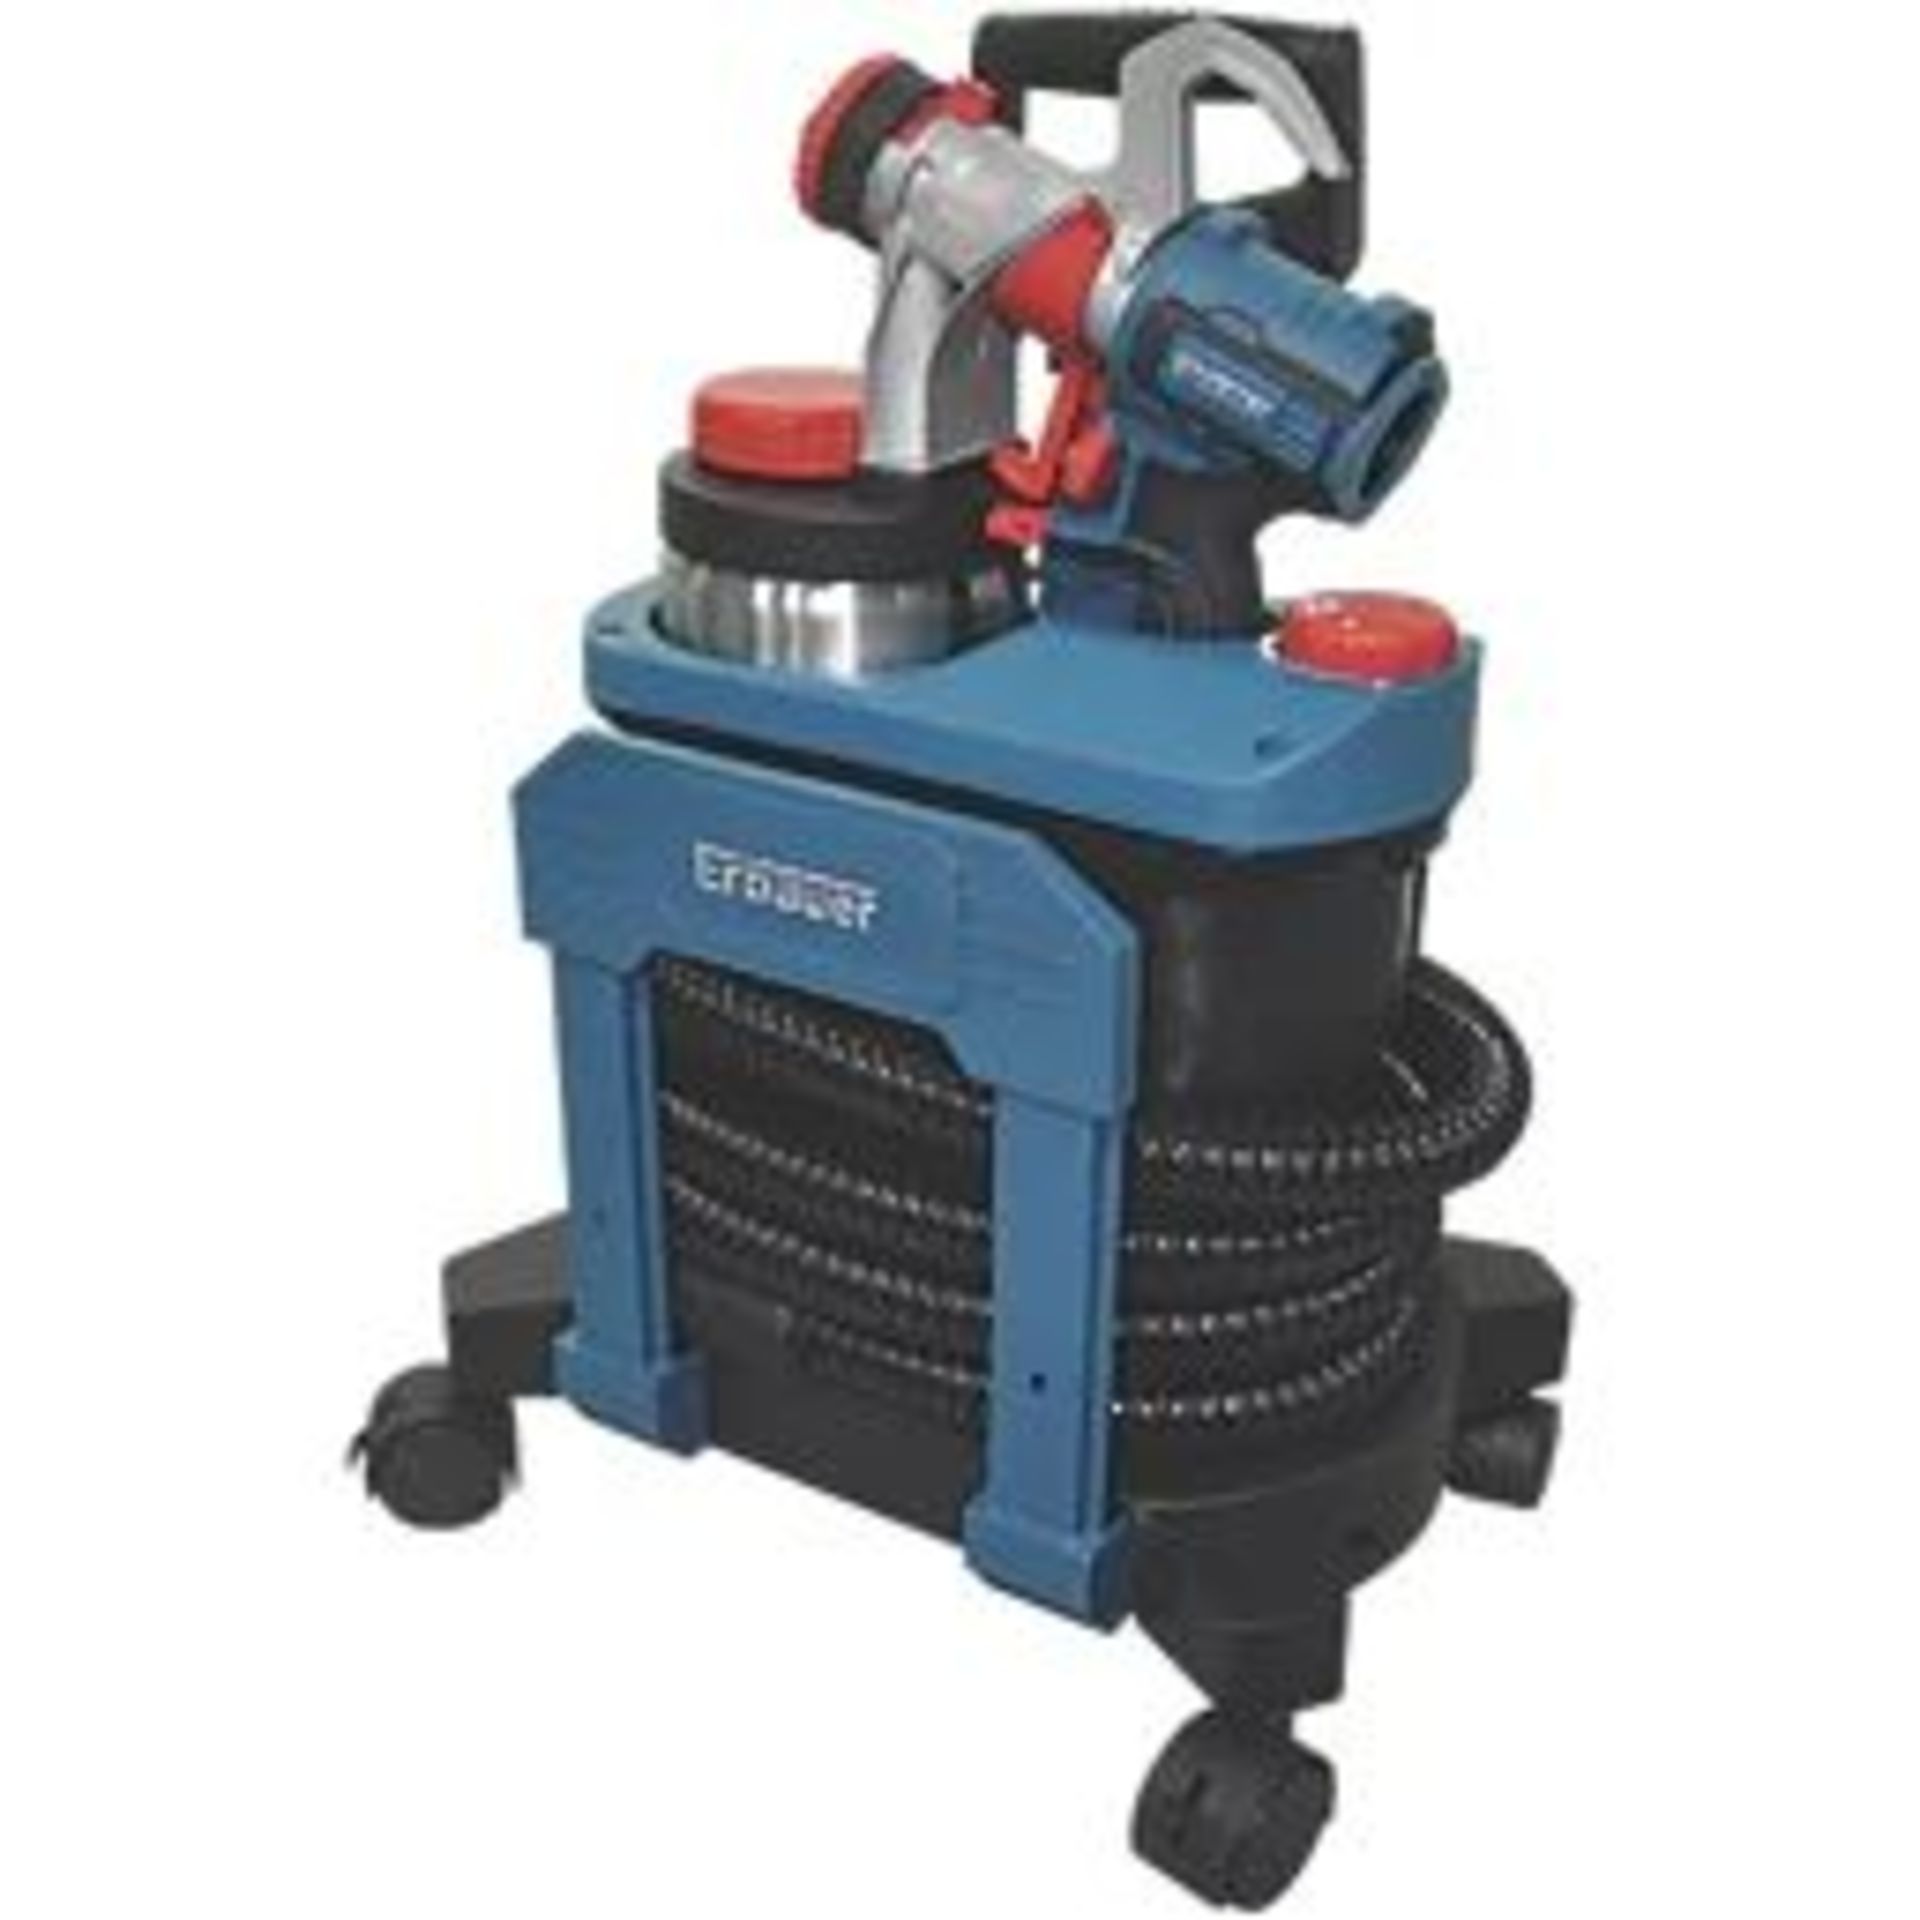 ERBAUER EPS800 800W ELECTRIC SPRAYER 240V. - Pw. Electric paint spray gun for use with oil and